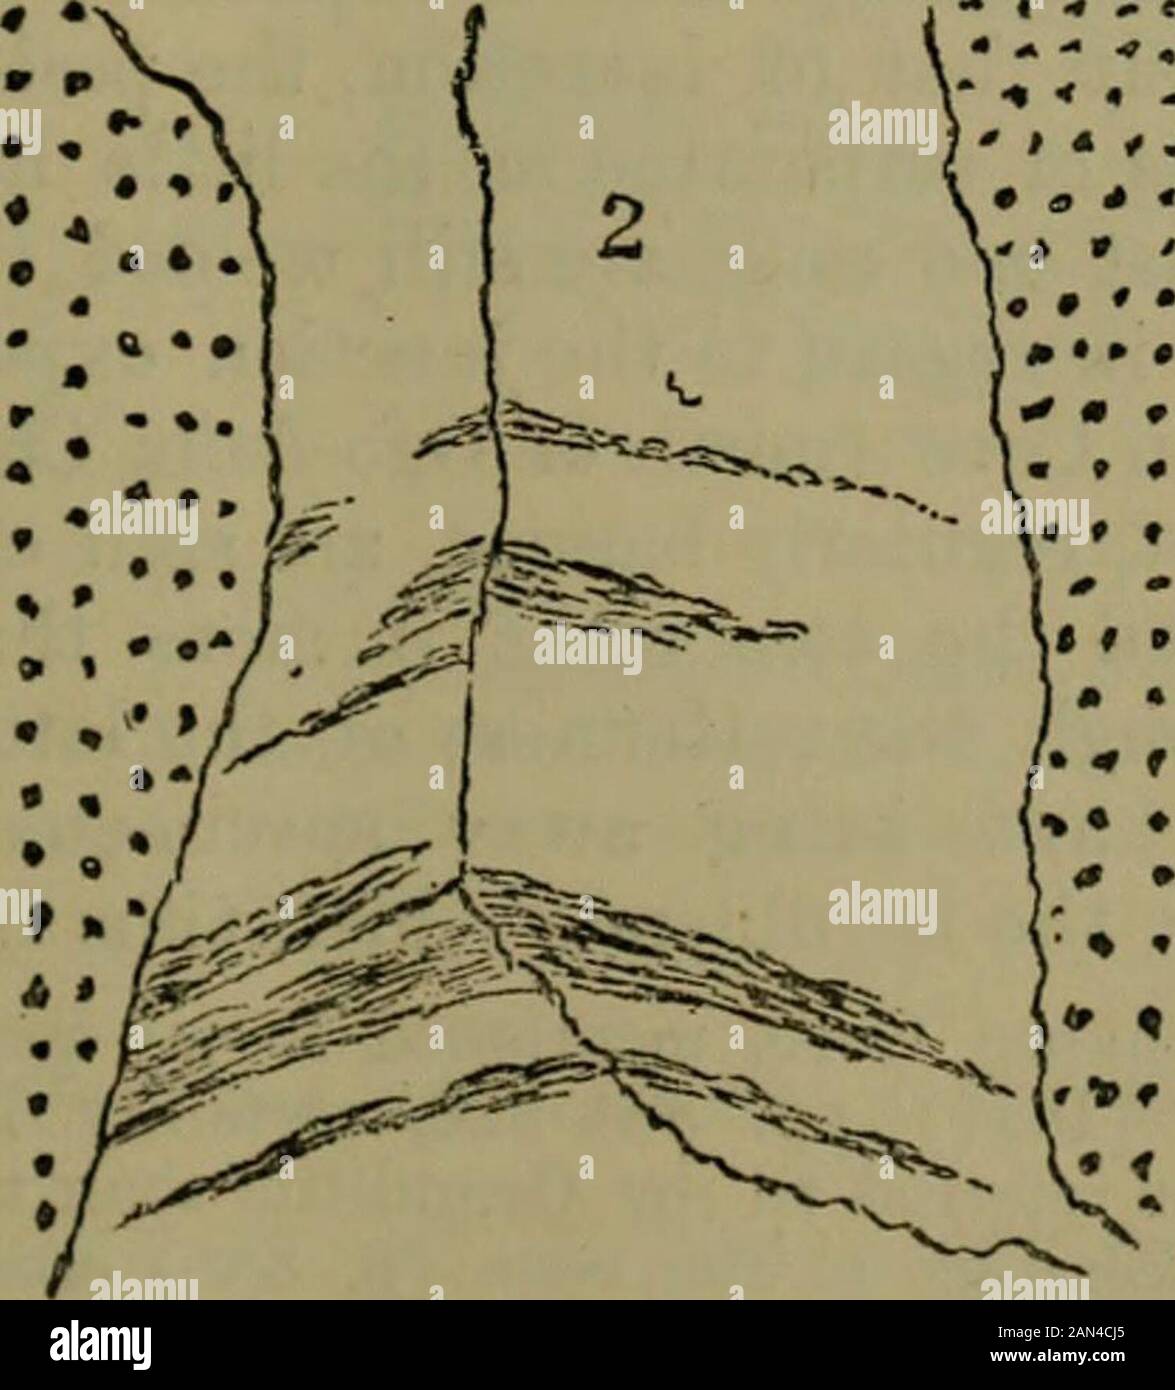 The Quarterly journal of the Geological Society of London . 1. Serpentine. 2. Reddish granitoid rock, with dark bands (Granulitic Group). one of less regular structure, the granitic veins may be seen to runup to the serpentine, and be, as it were, cut off by it (fig. 2). Sofar as structure goes, the relations of the Granulitic Group and theserpentine are identical with those which are exhibited by bandedgneisses or schists, and granites intrusive into them. Fig. 2.—Section near Cavour/a Roclcs.. 1. Serpentine. 2. Granulitic Group. The darker part represents the dioritic, tlie lighter the grani Stock Photo